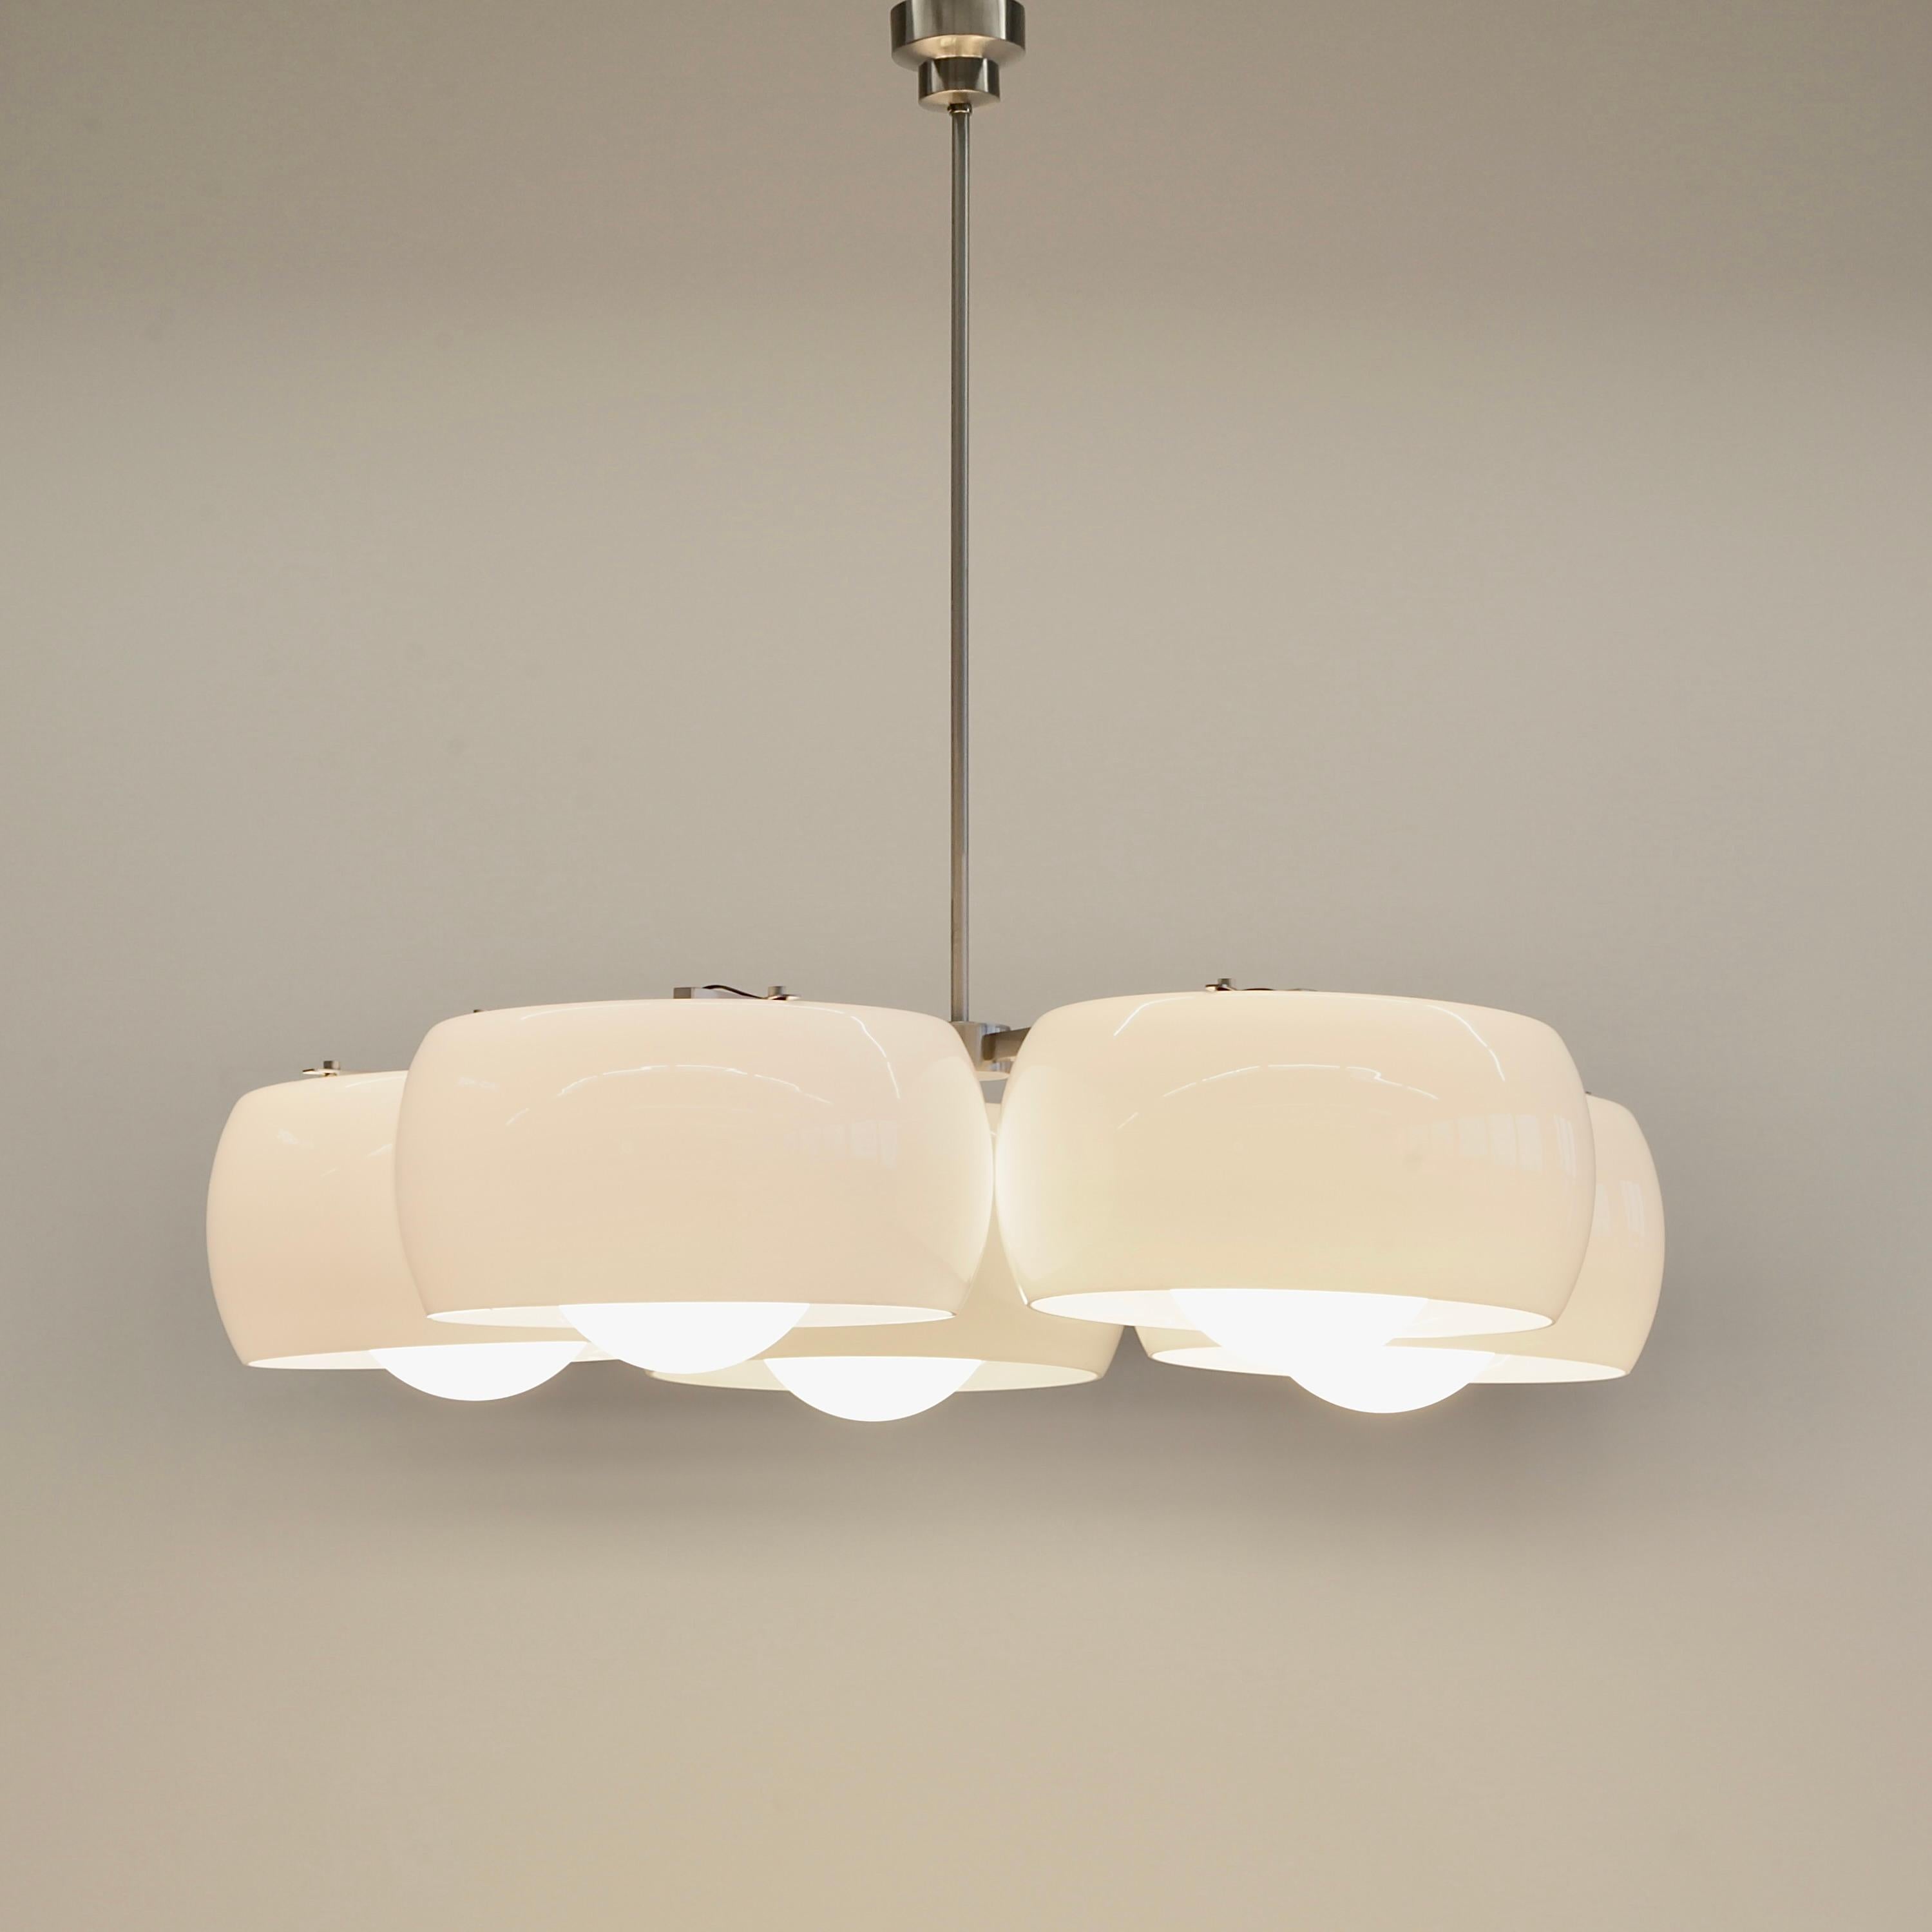 Mid-20th Century Large Ceiling Lamp Pentaclinio Designed by Vico Magistretti for Artemide, 1961